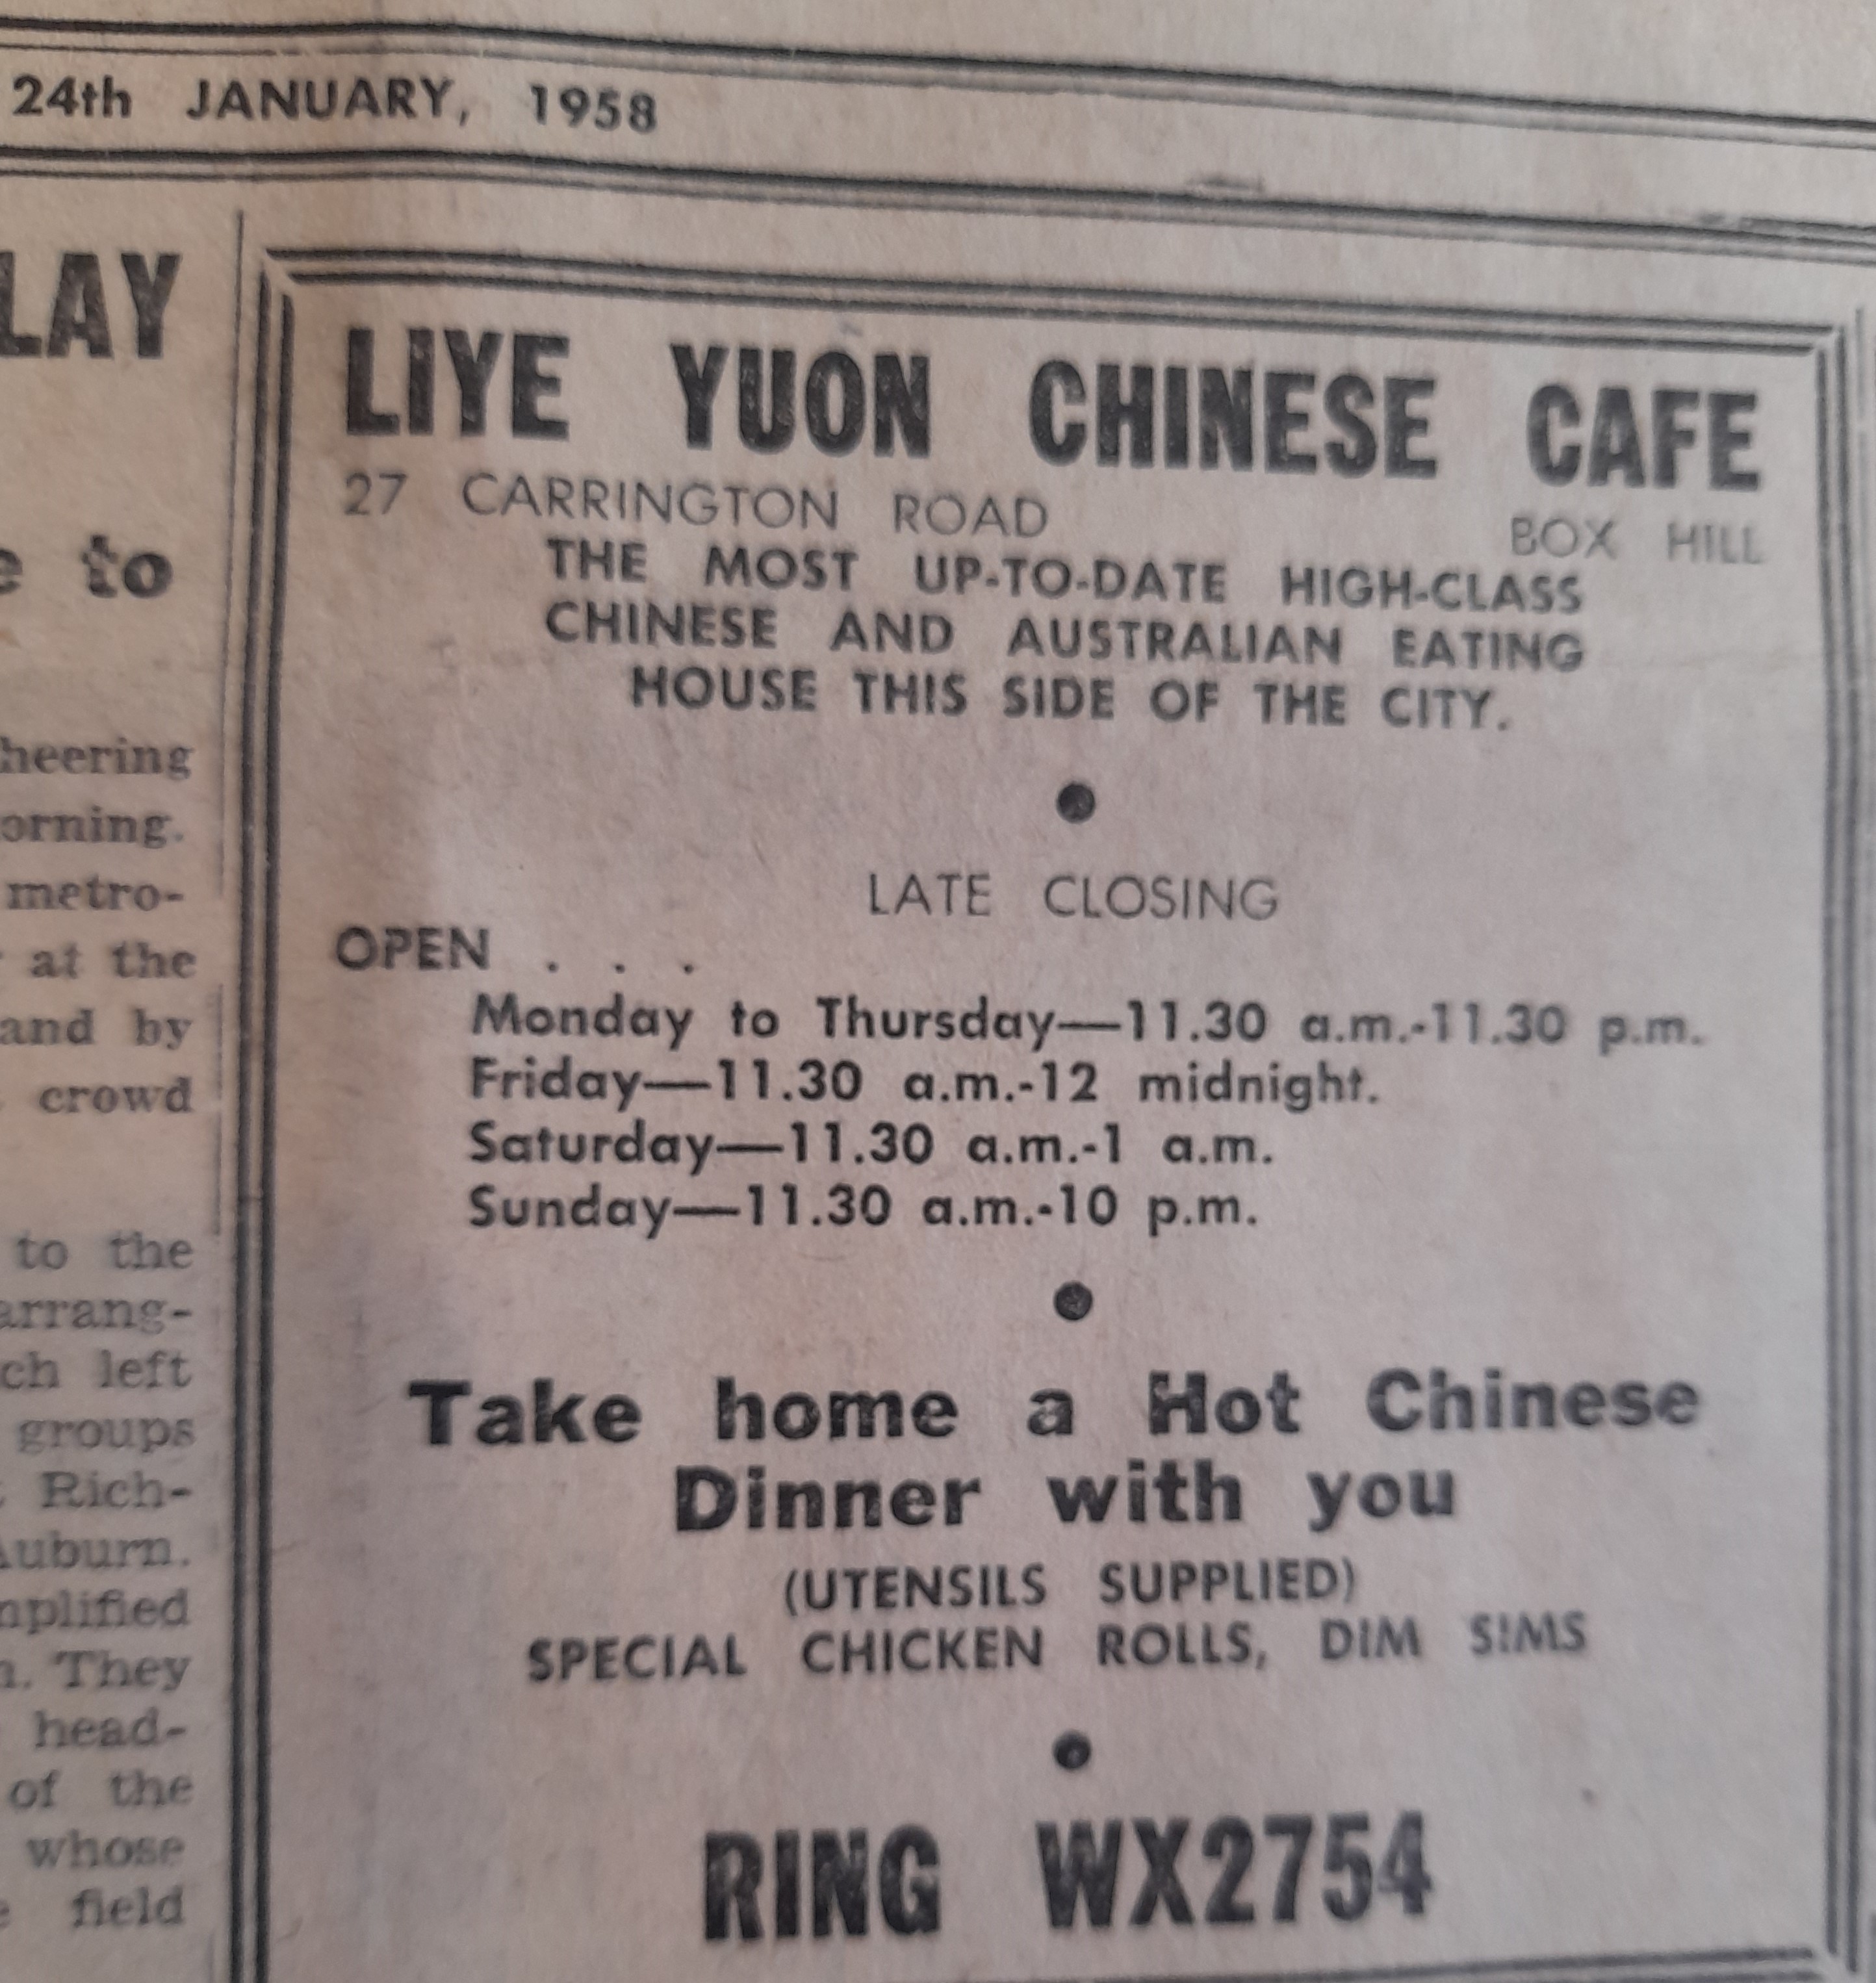 A newspaper clipping in black and white for Liye Yuon Chinese cafe, showing opening hours and "take home a hot Chinese dinner"